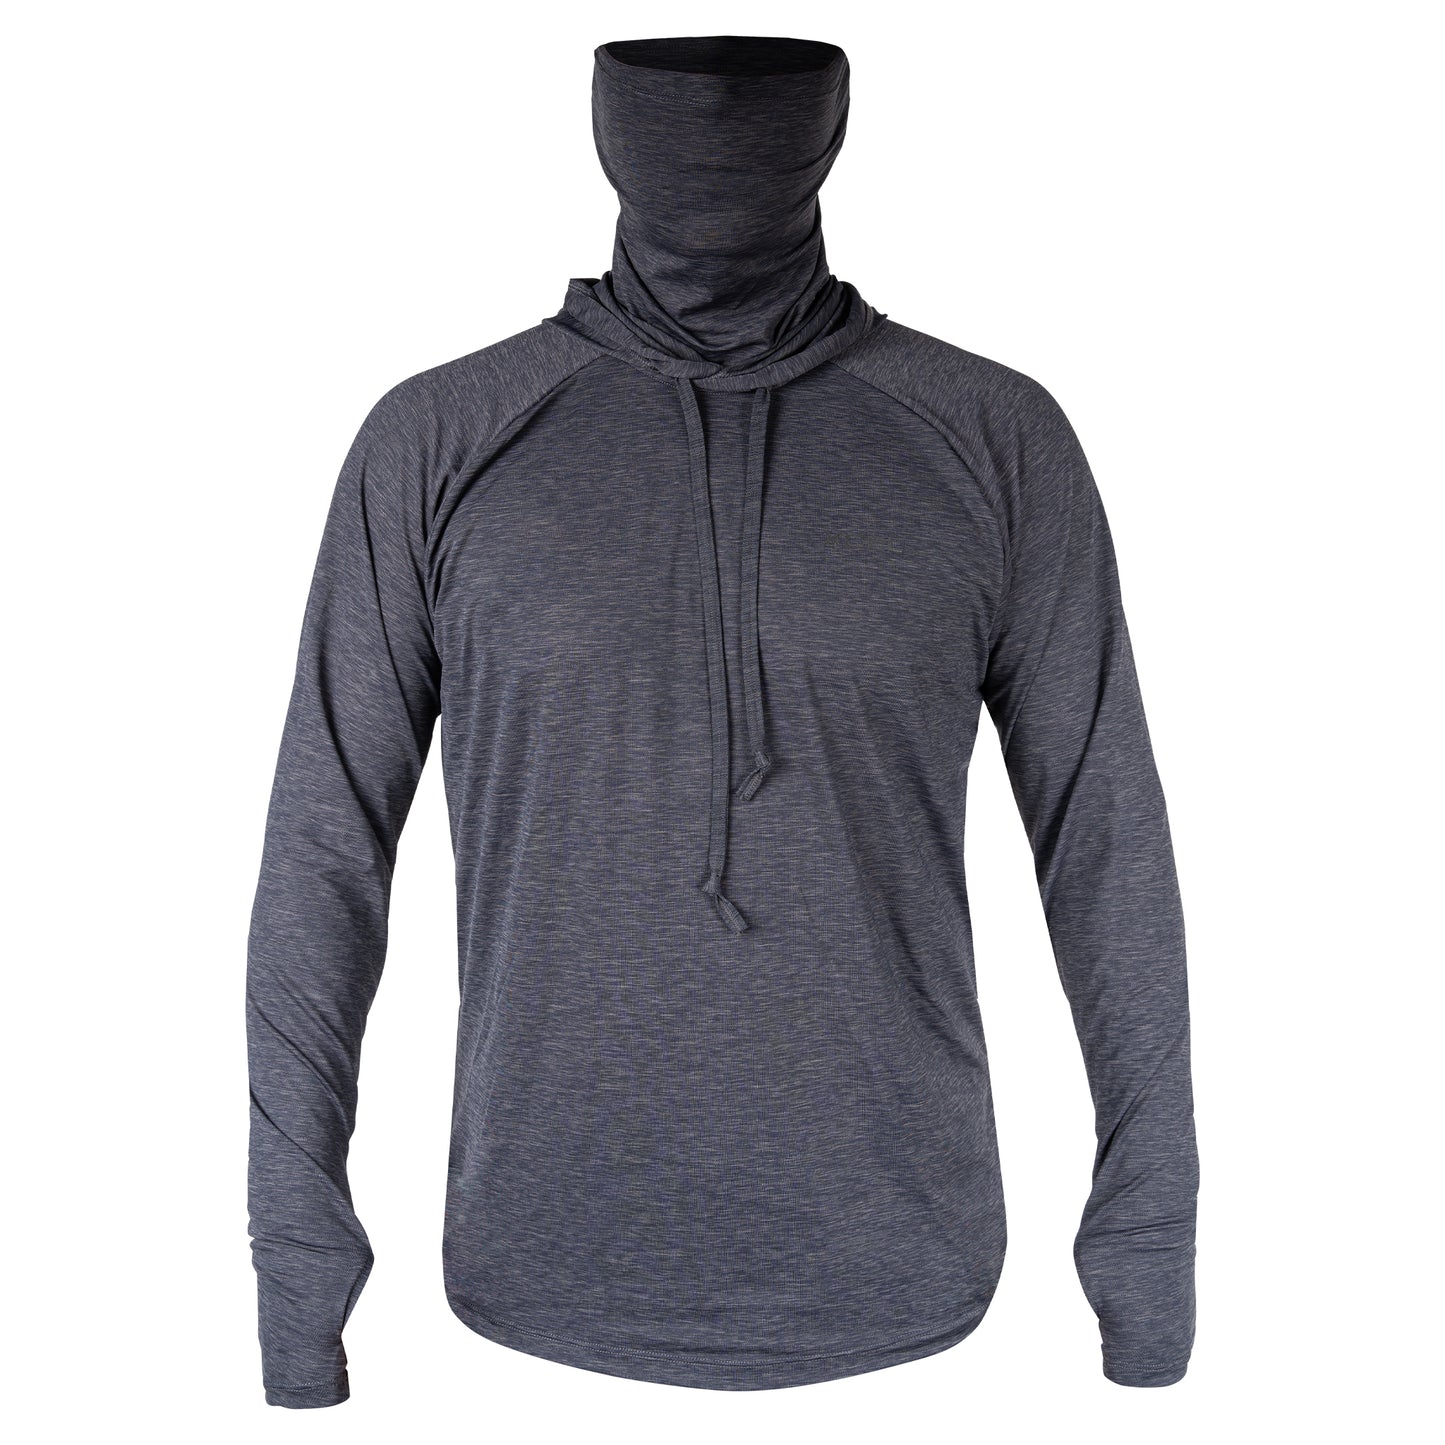 Men's Heathered VentX Hooded Pullover Top W/Face Cover UV